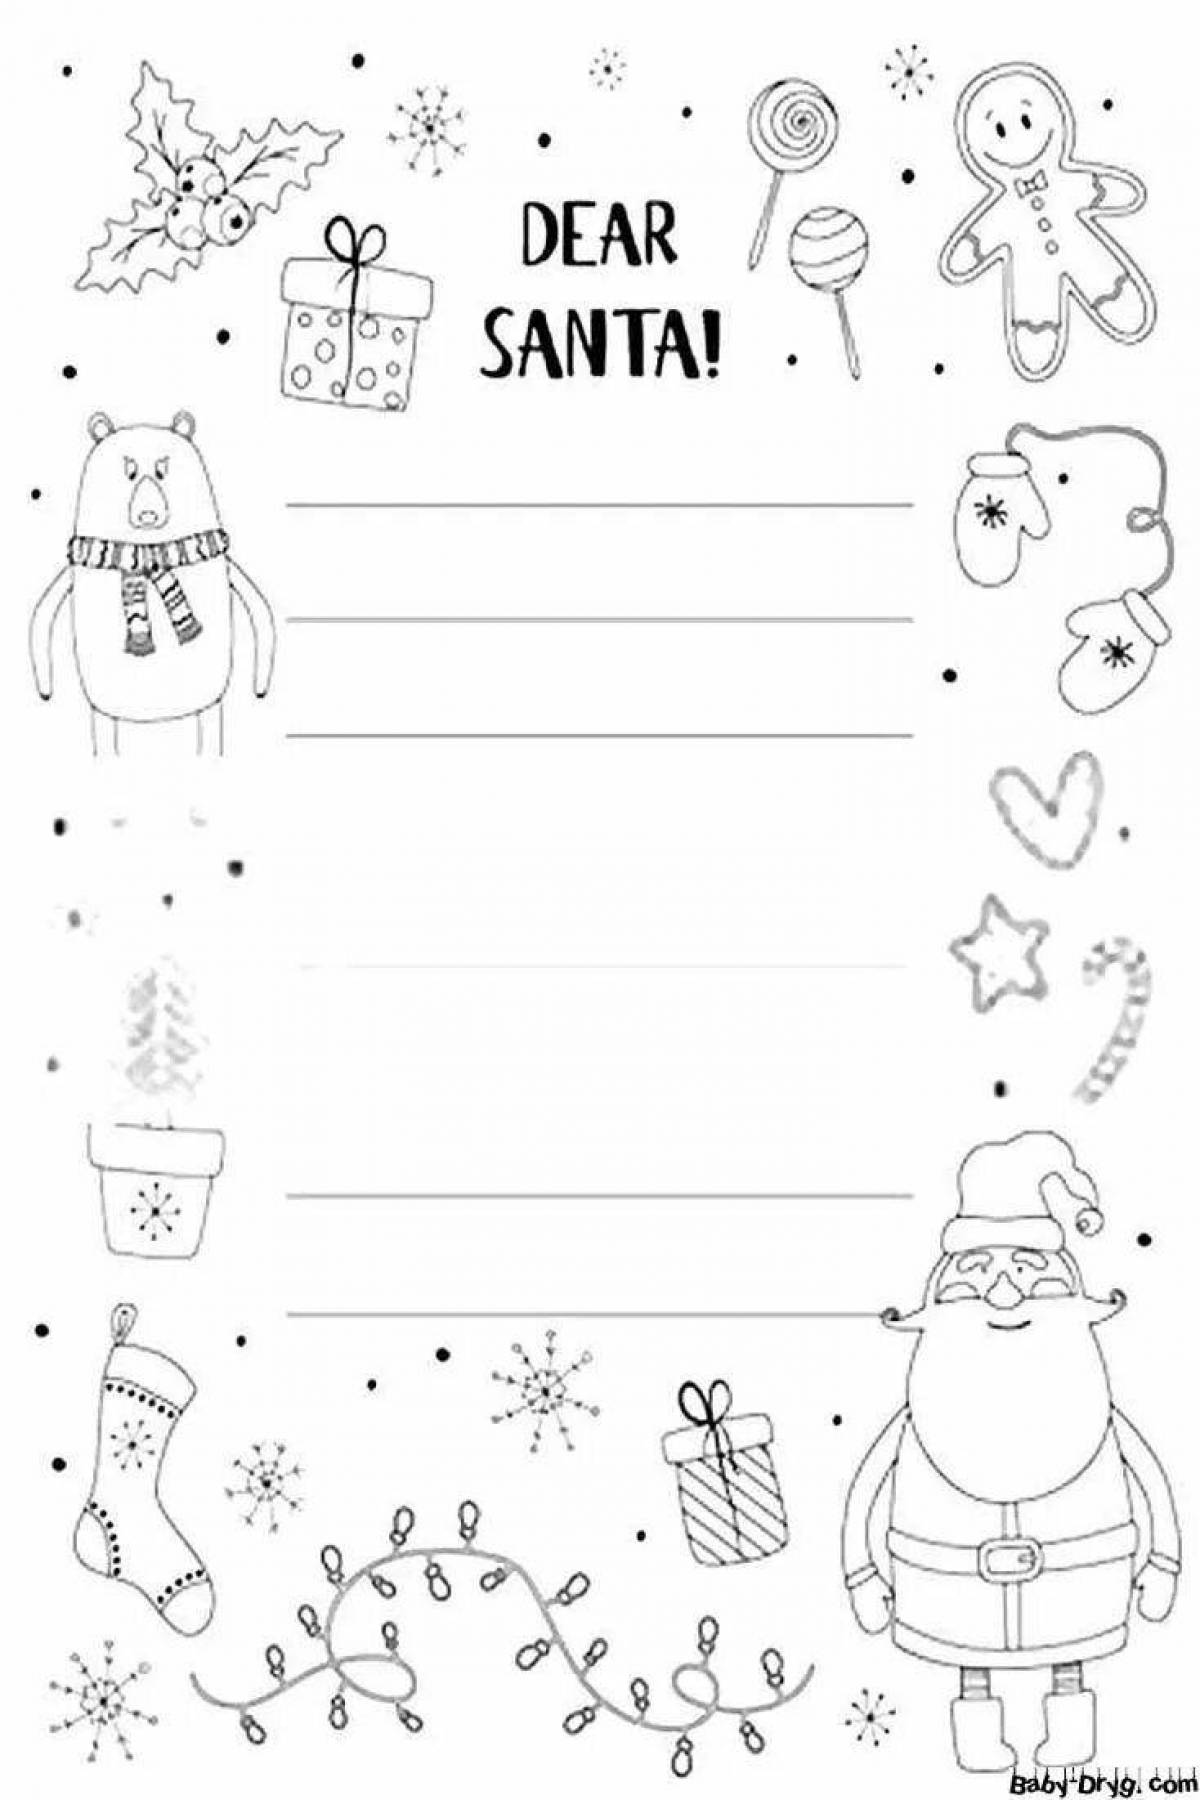 Colorful envelope with santa's letter